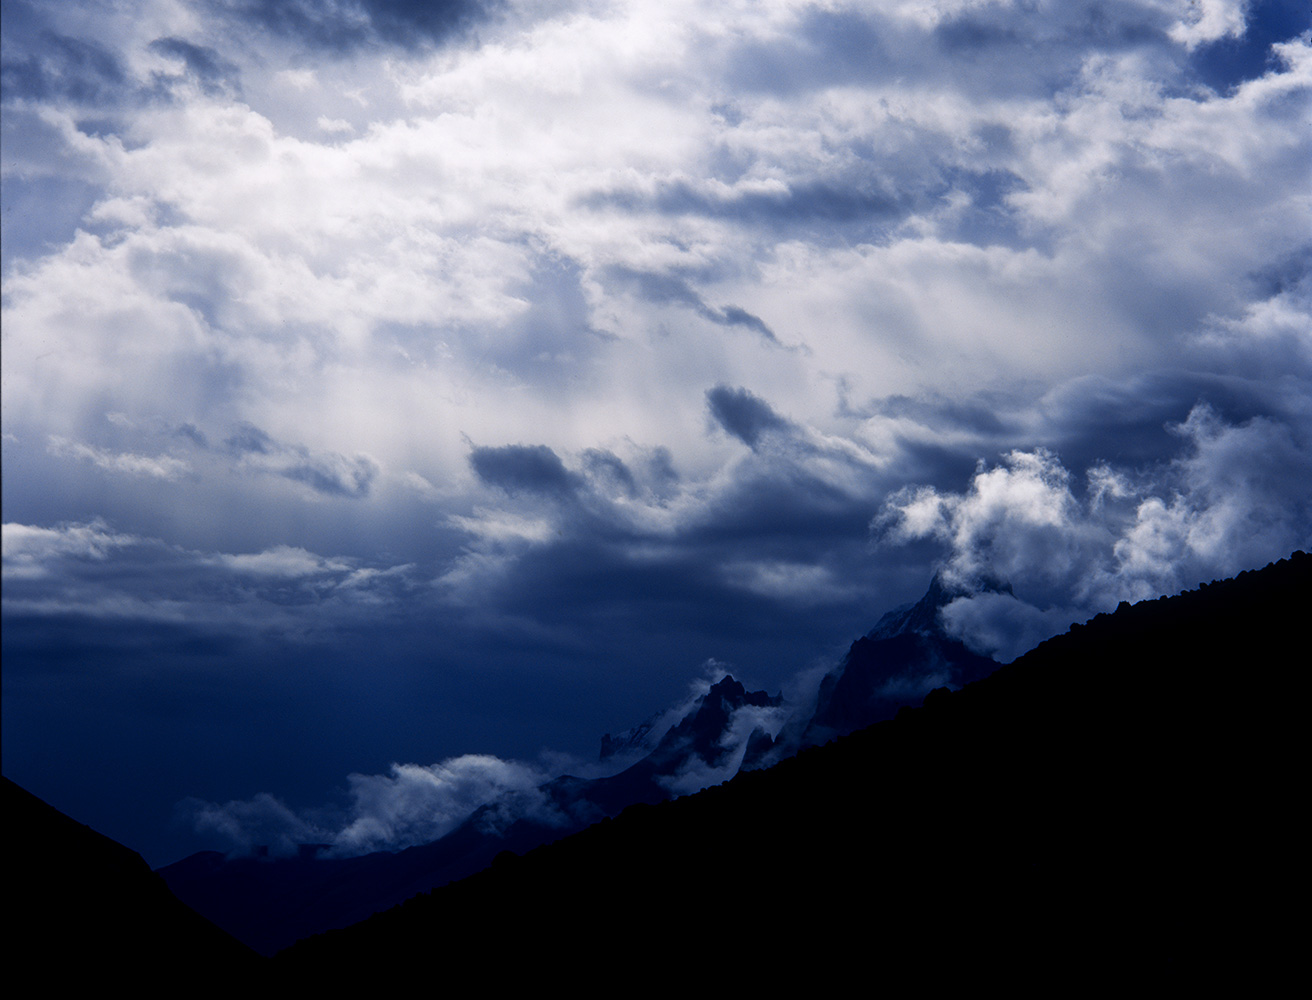 Storm clouds clearing in the upper Chapursan valley at BualtarBronica ETRSi, Fuji RDP2